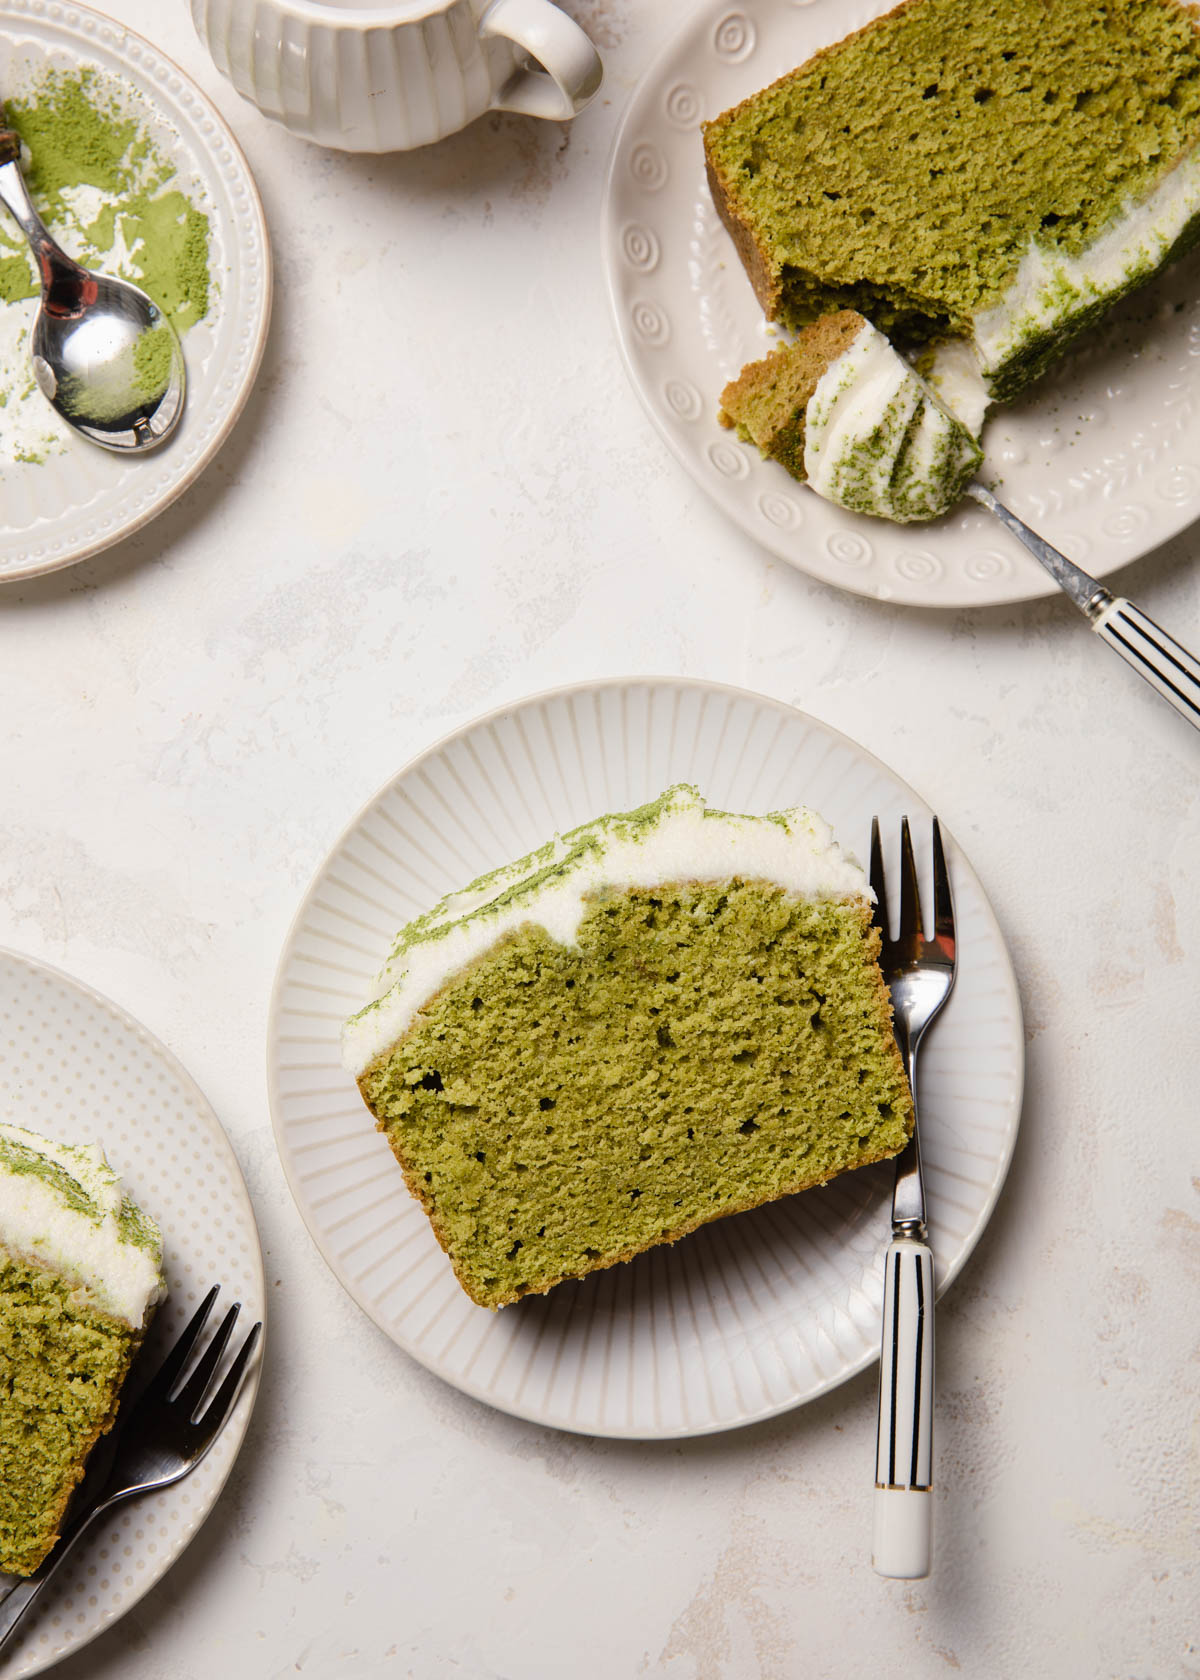 Slices of matcha cake on white plates with coconut frosting on top